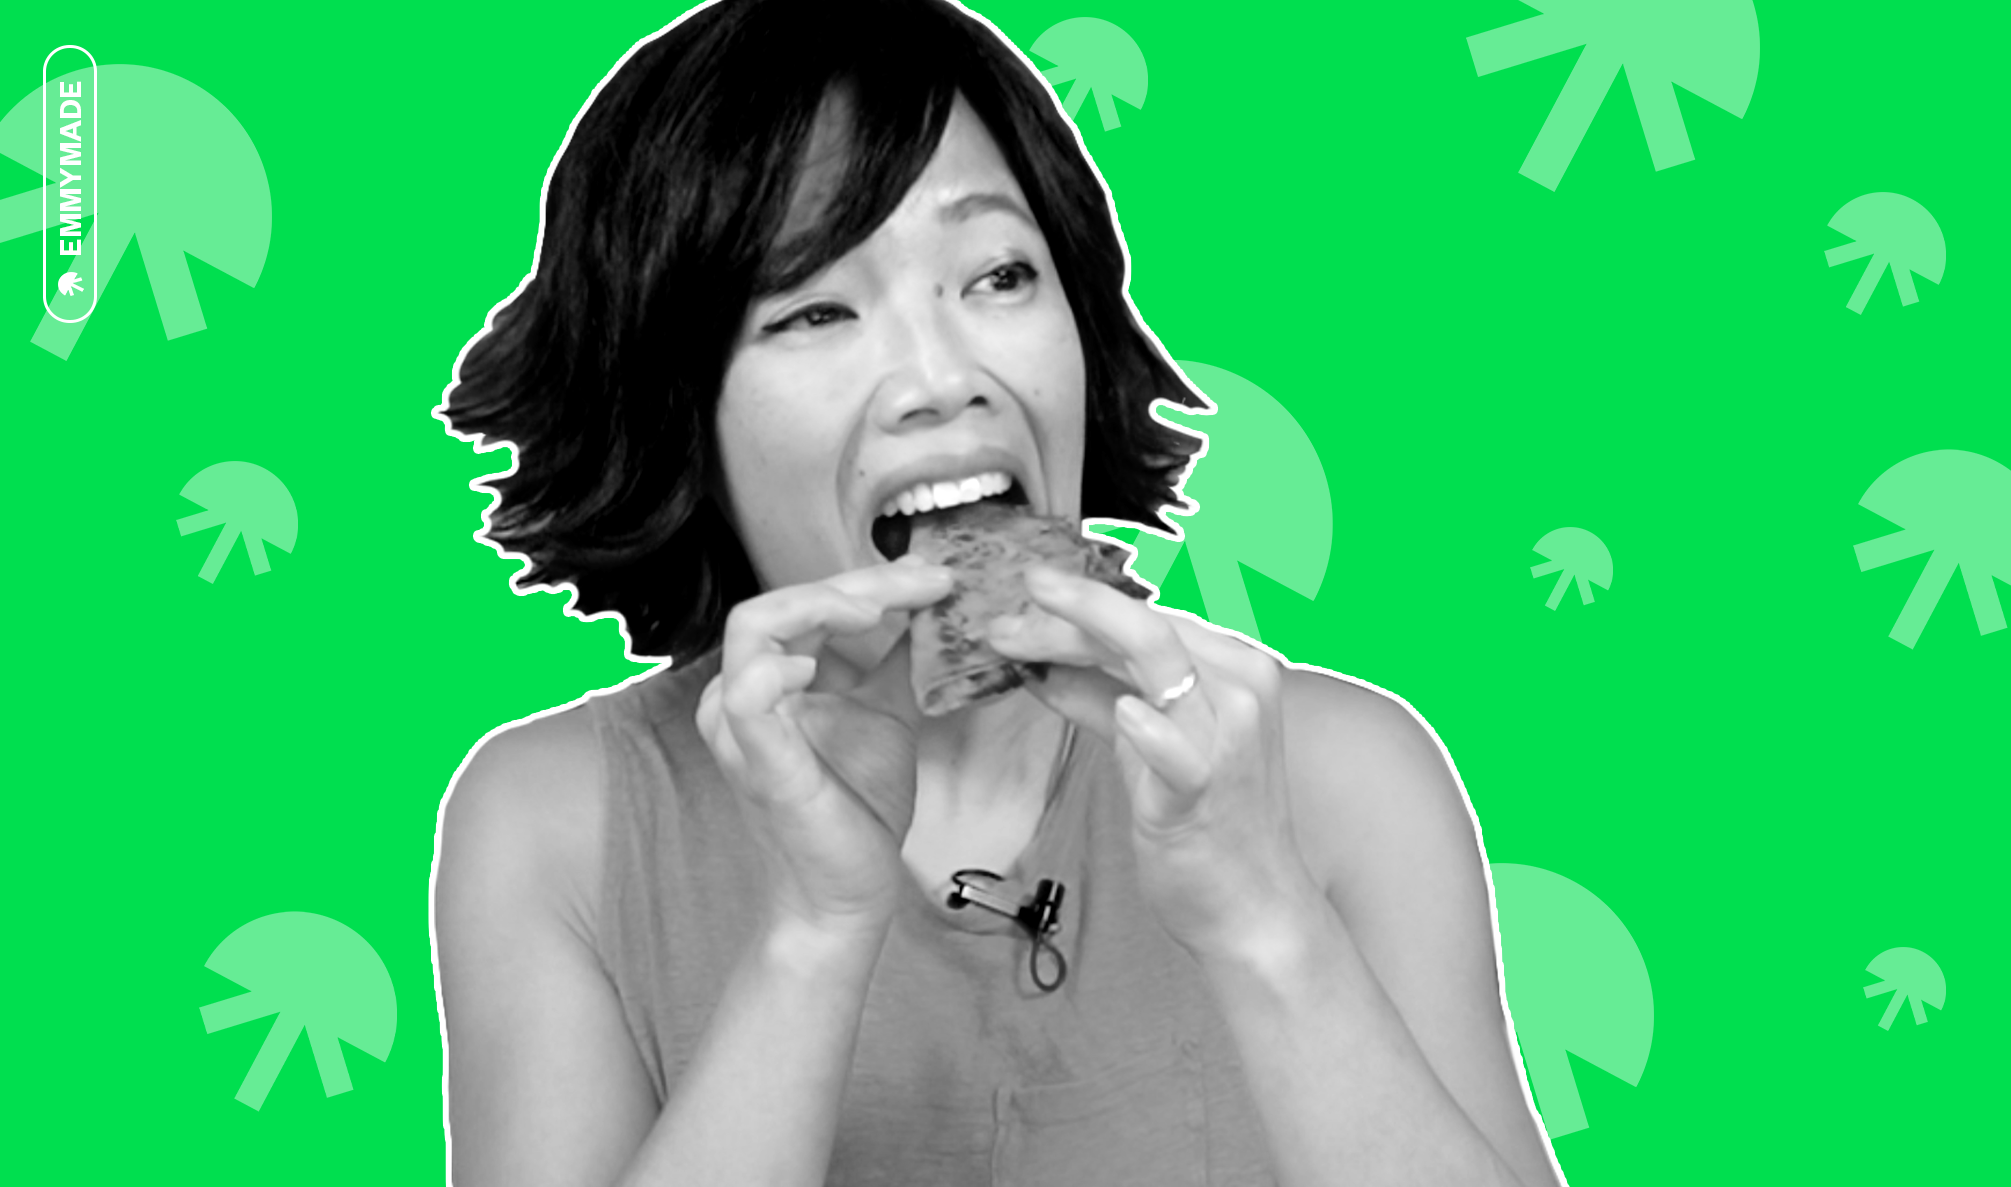 Creator Emmymade taking a bite out of food in black and white on a green background with jellyfish iconis